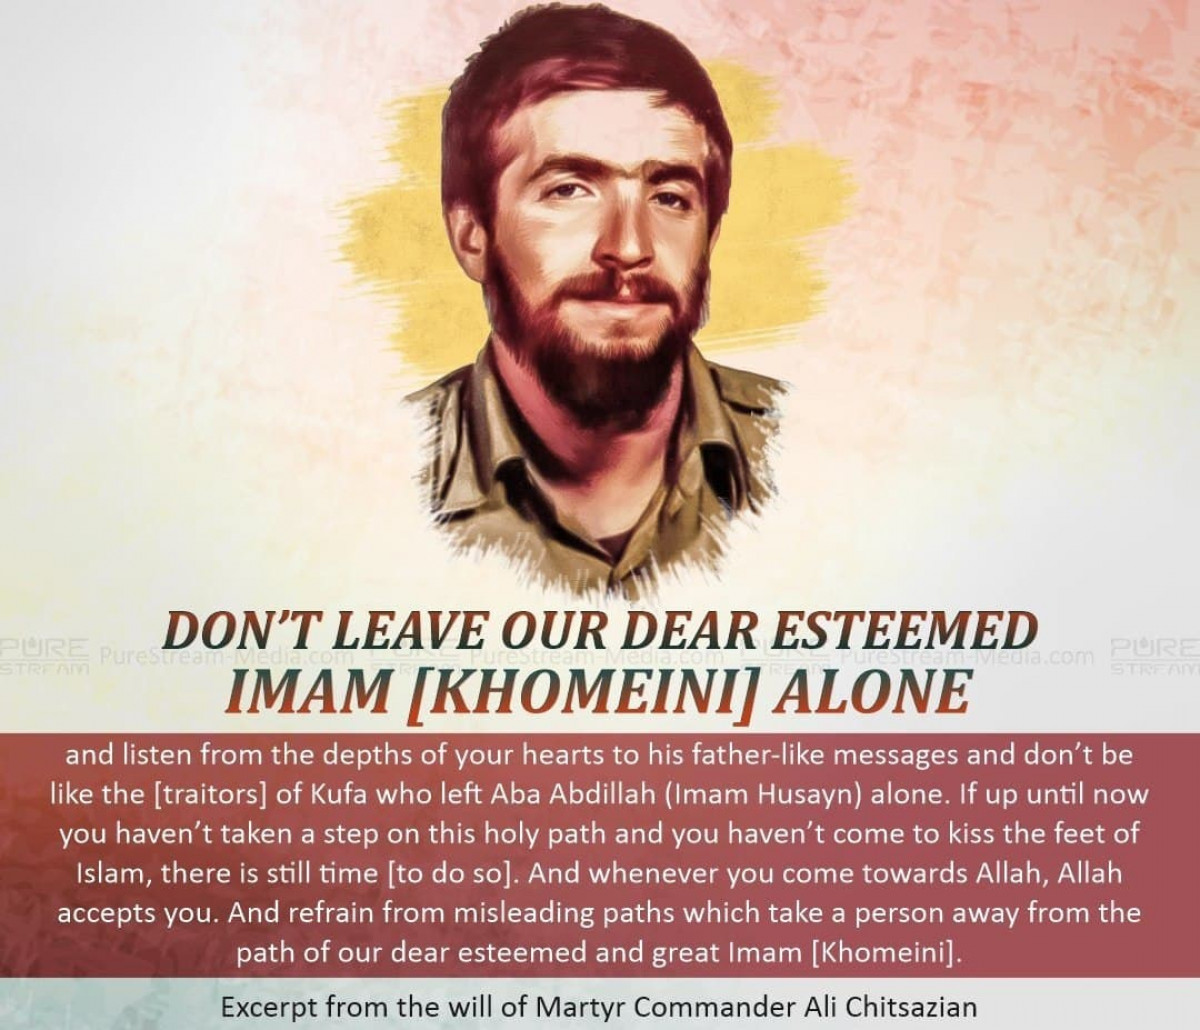 Excerpt from the will of Martyr Commander Ali Chitsazian